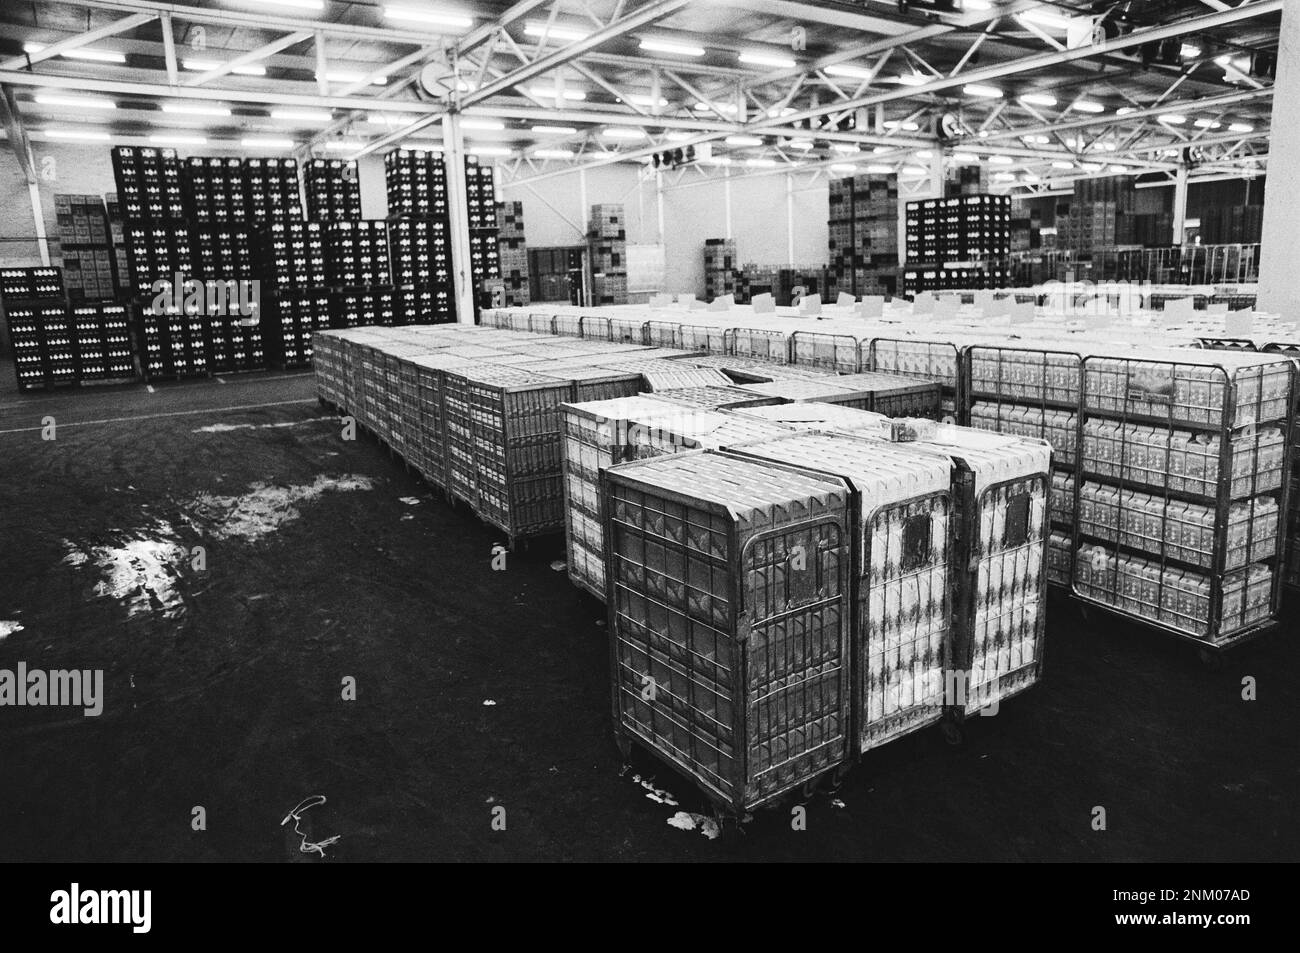 Netherlands History: Milk drivers CMC Melkunie in Amsterdam on strike; large quantities of milk that is not transported ca. January 8, 1980 Stock Photo